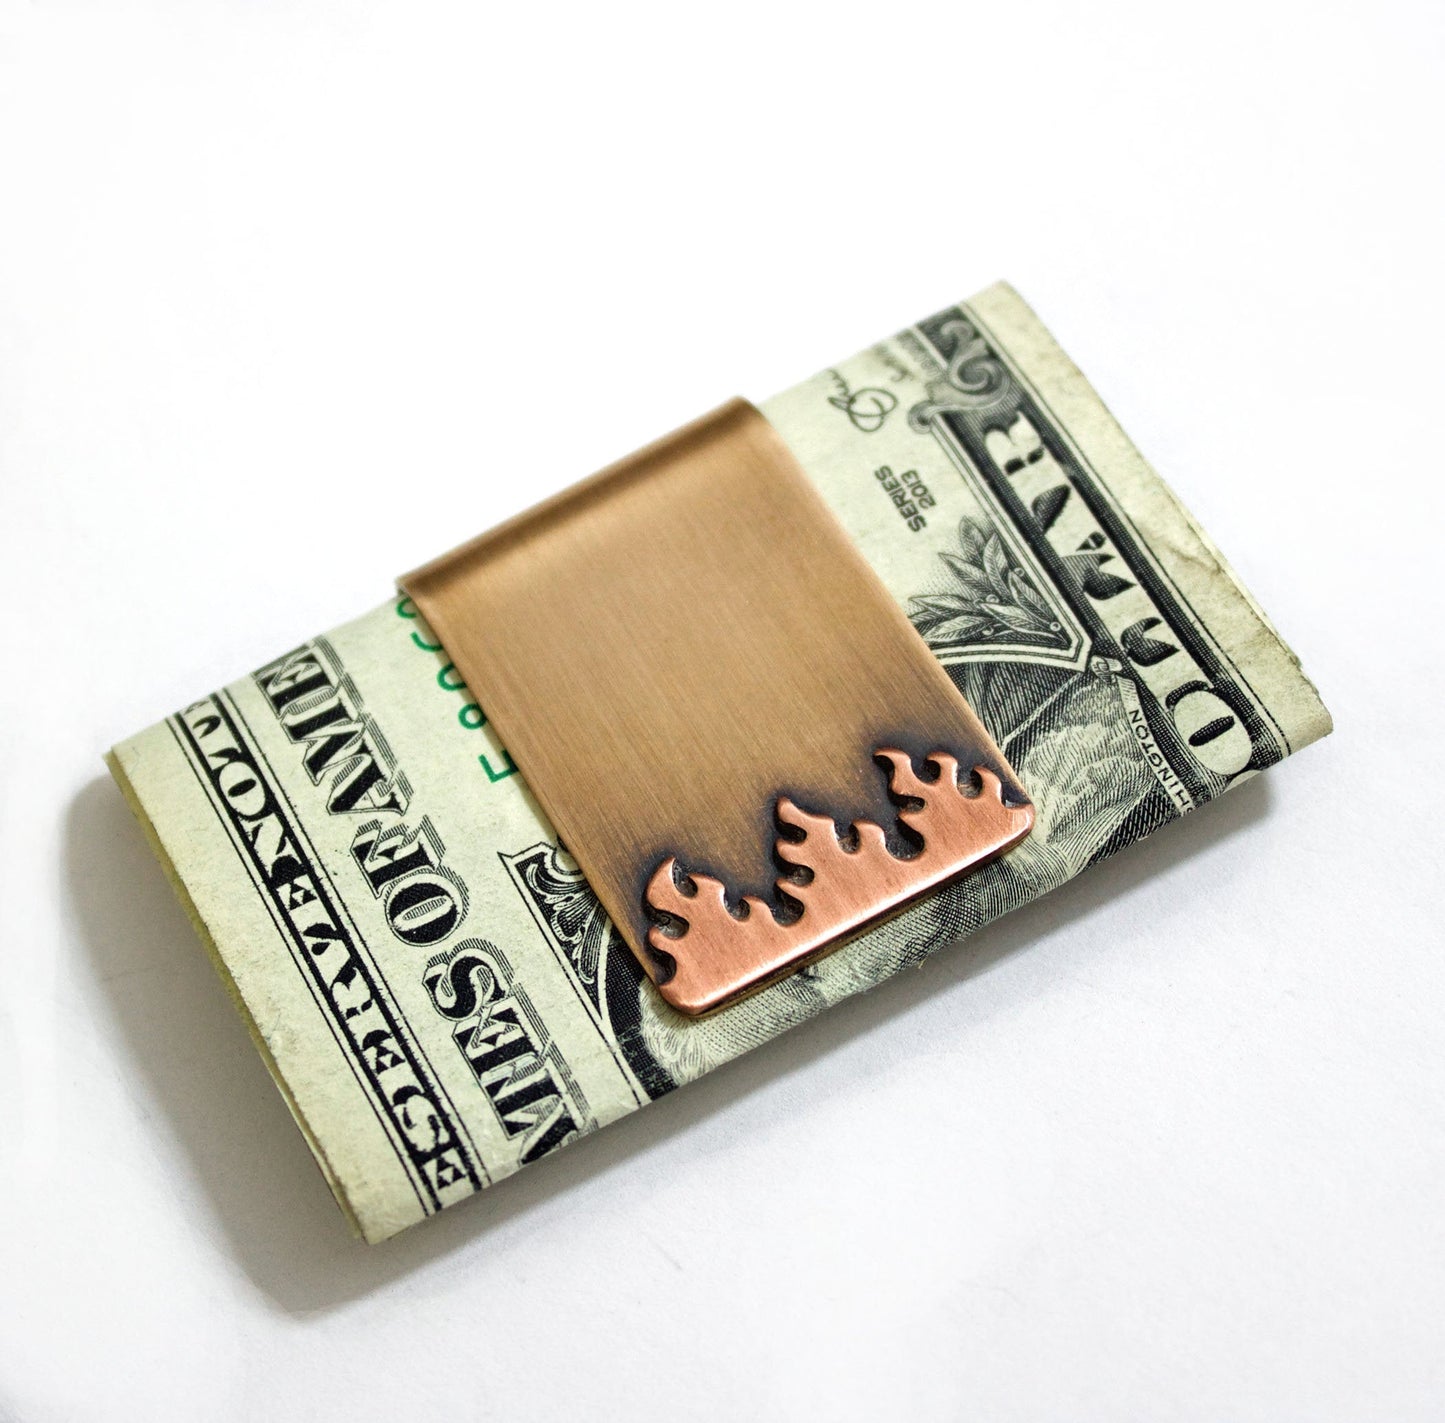 Flames Money Clip in Bronze and Copper